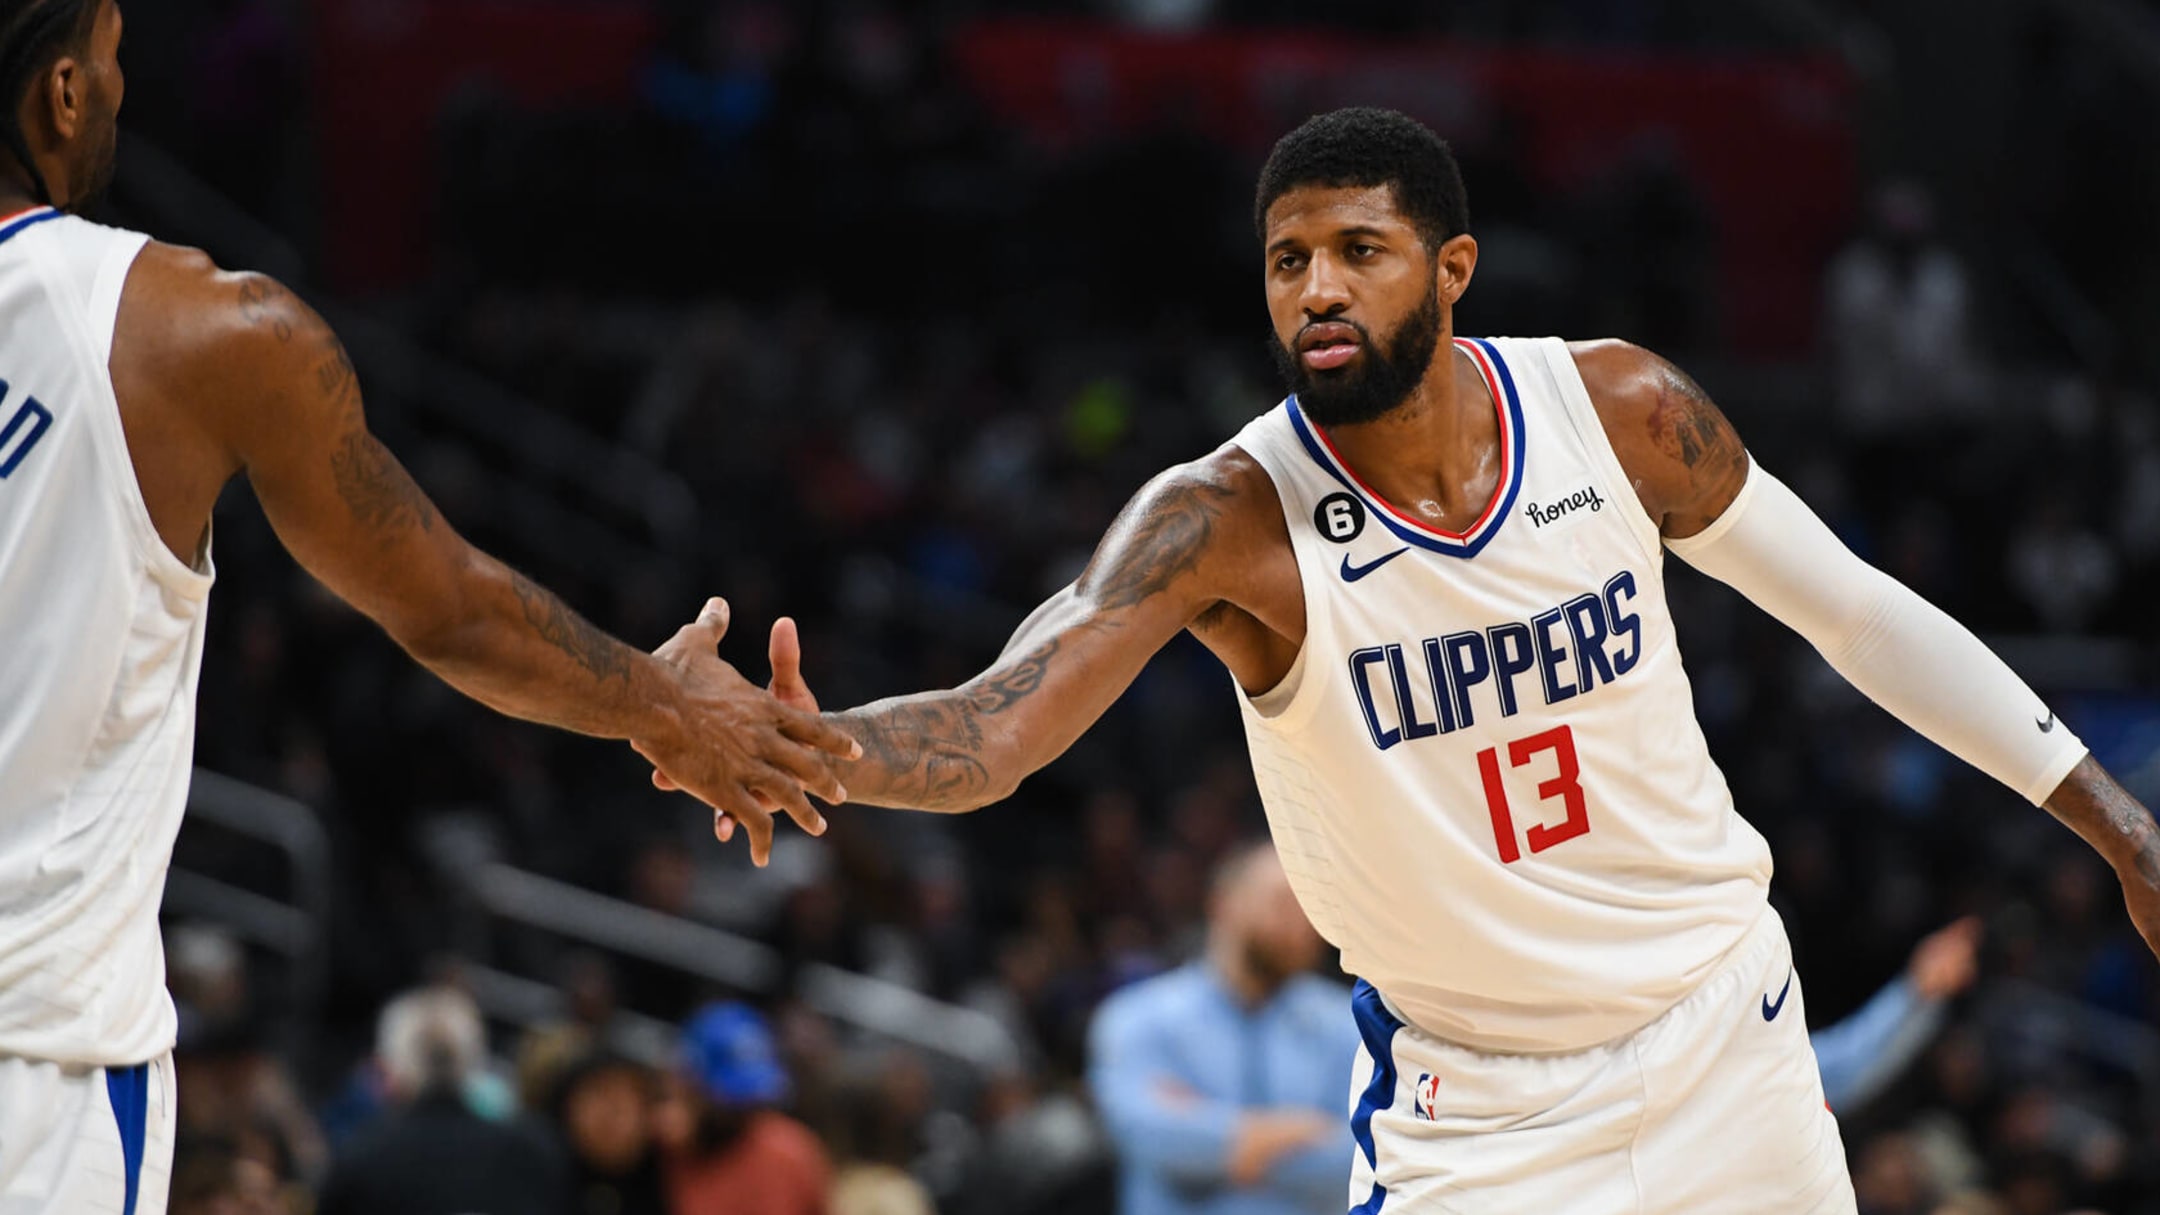 Sources: Knicks, Clippers have had contact on potential Paul George trade